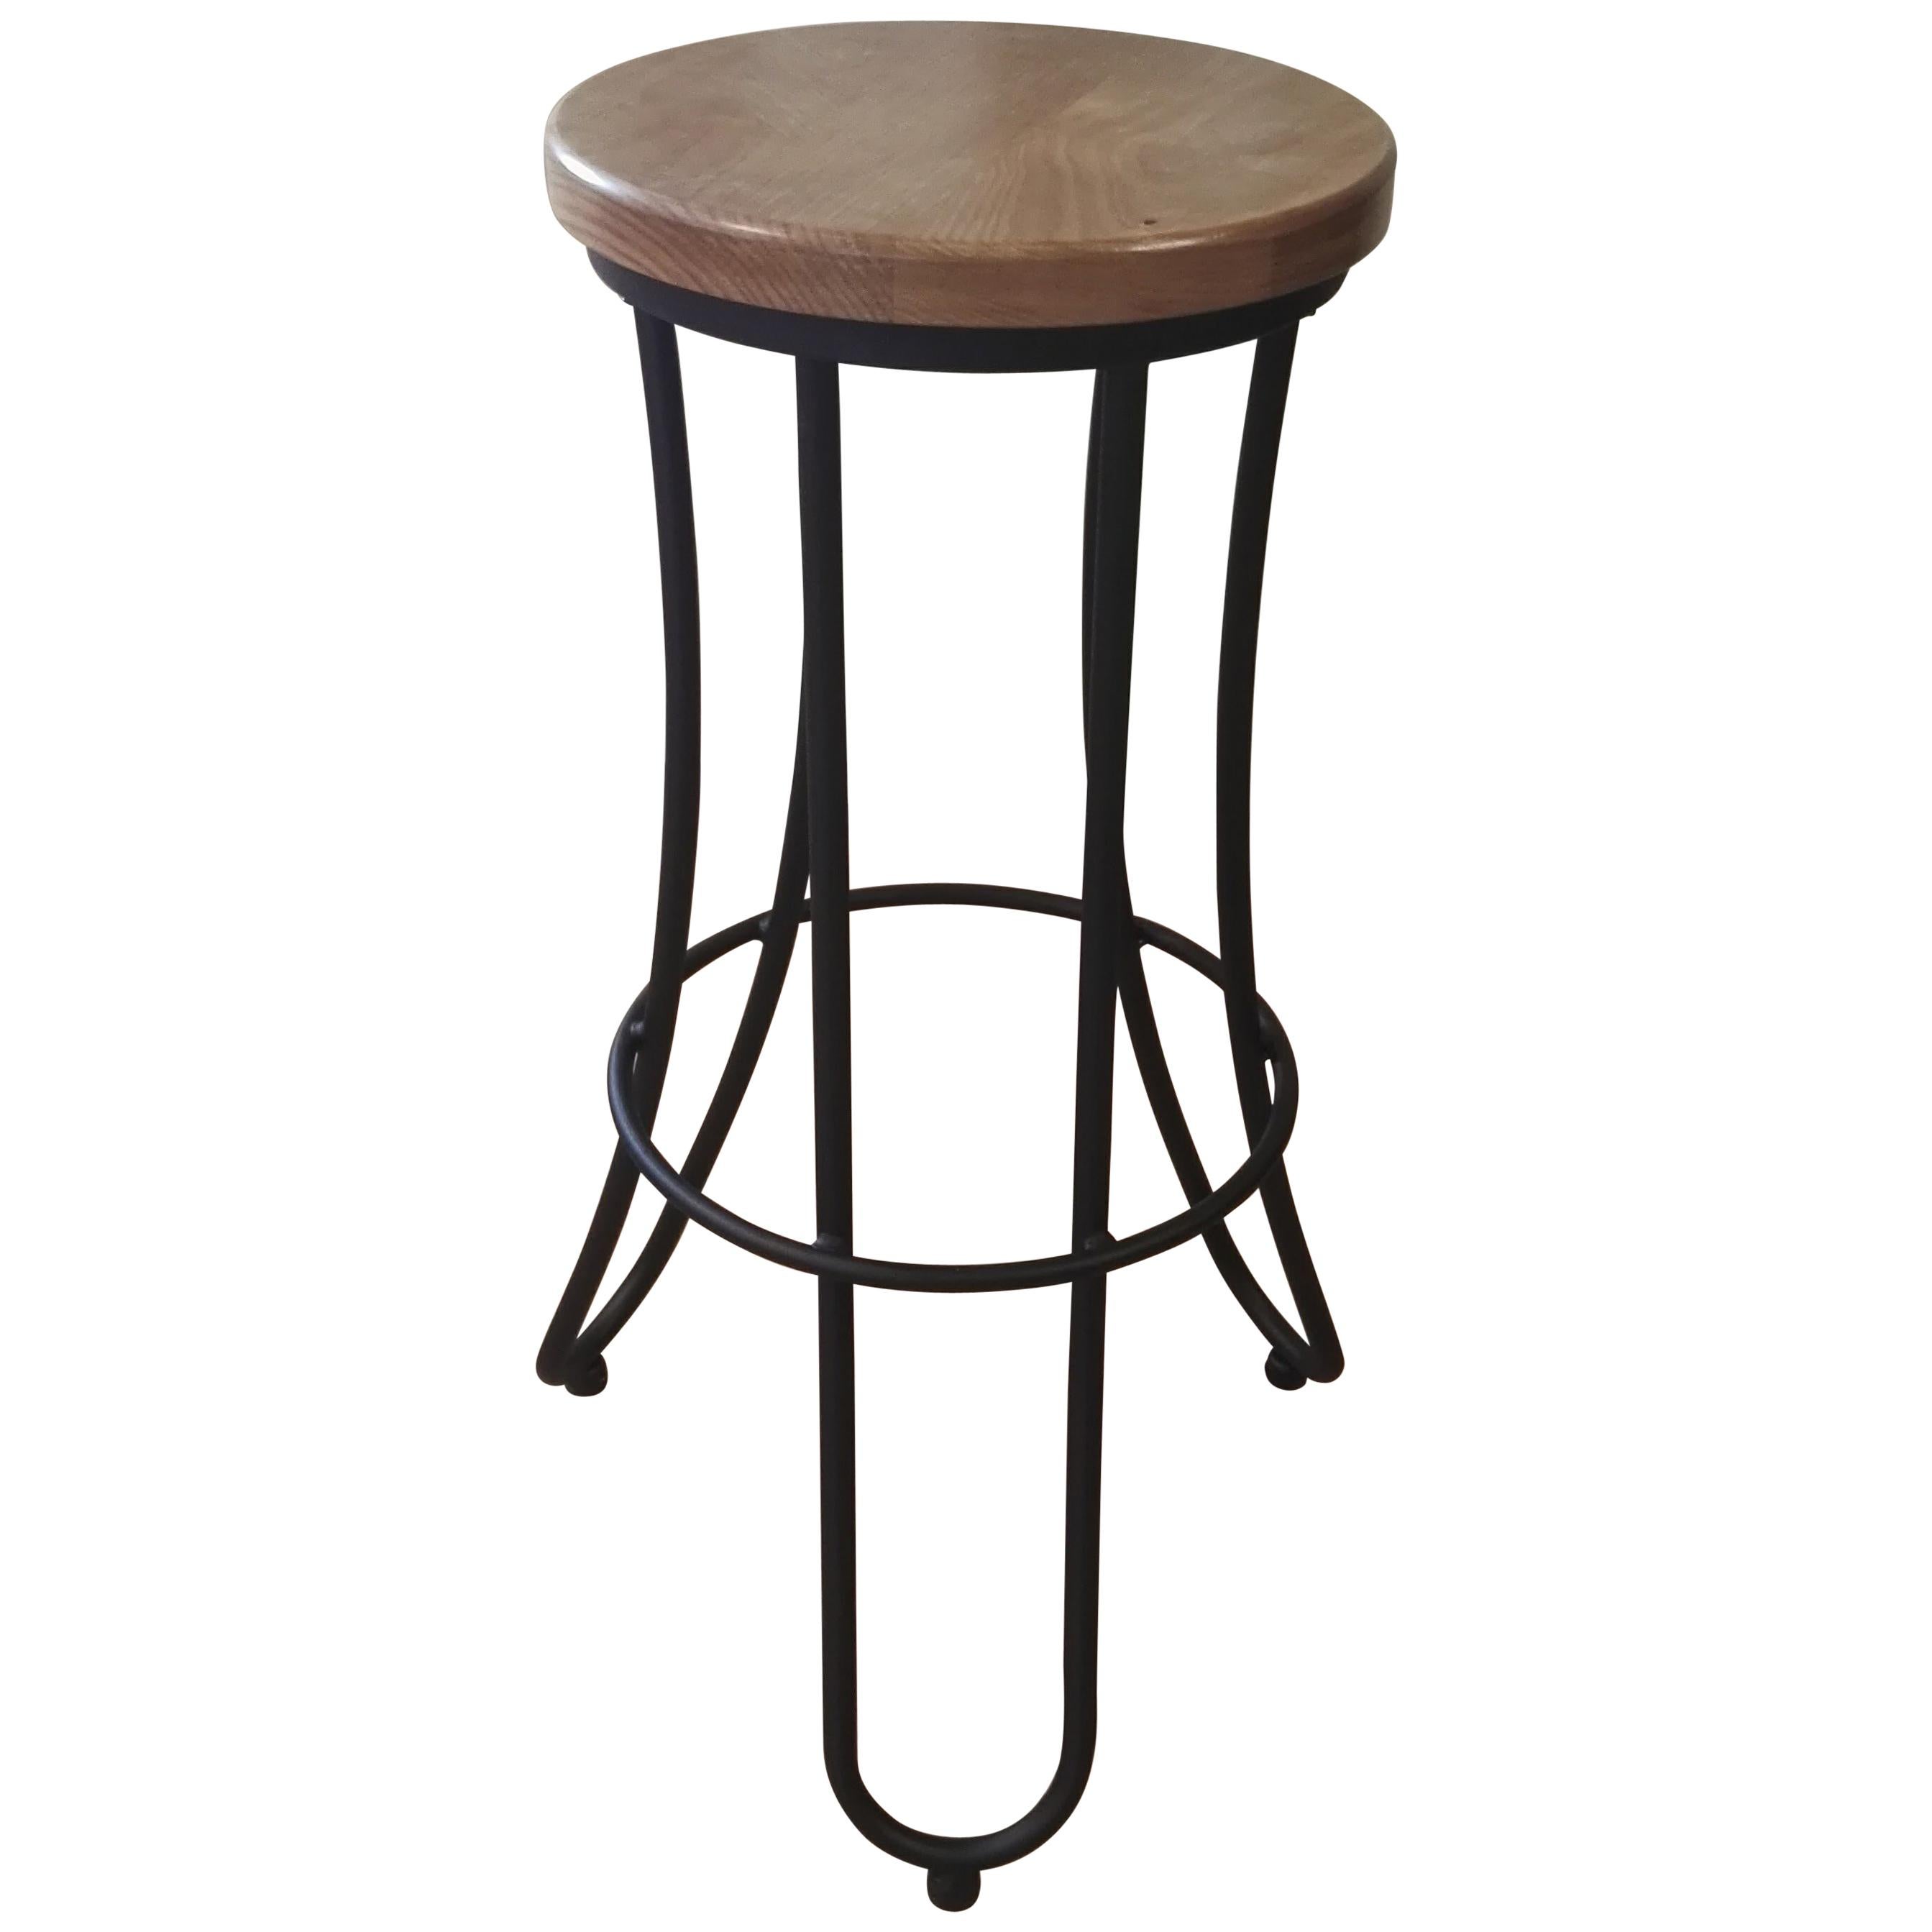 New Industrial Wrought Iron Shop Stool with Oak Seat